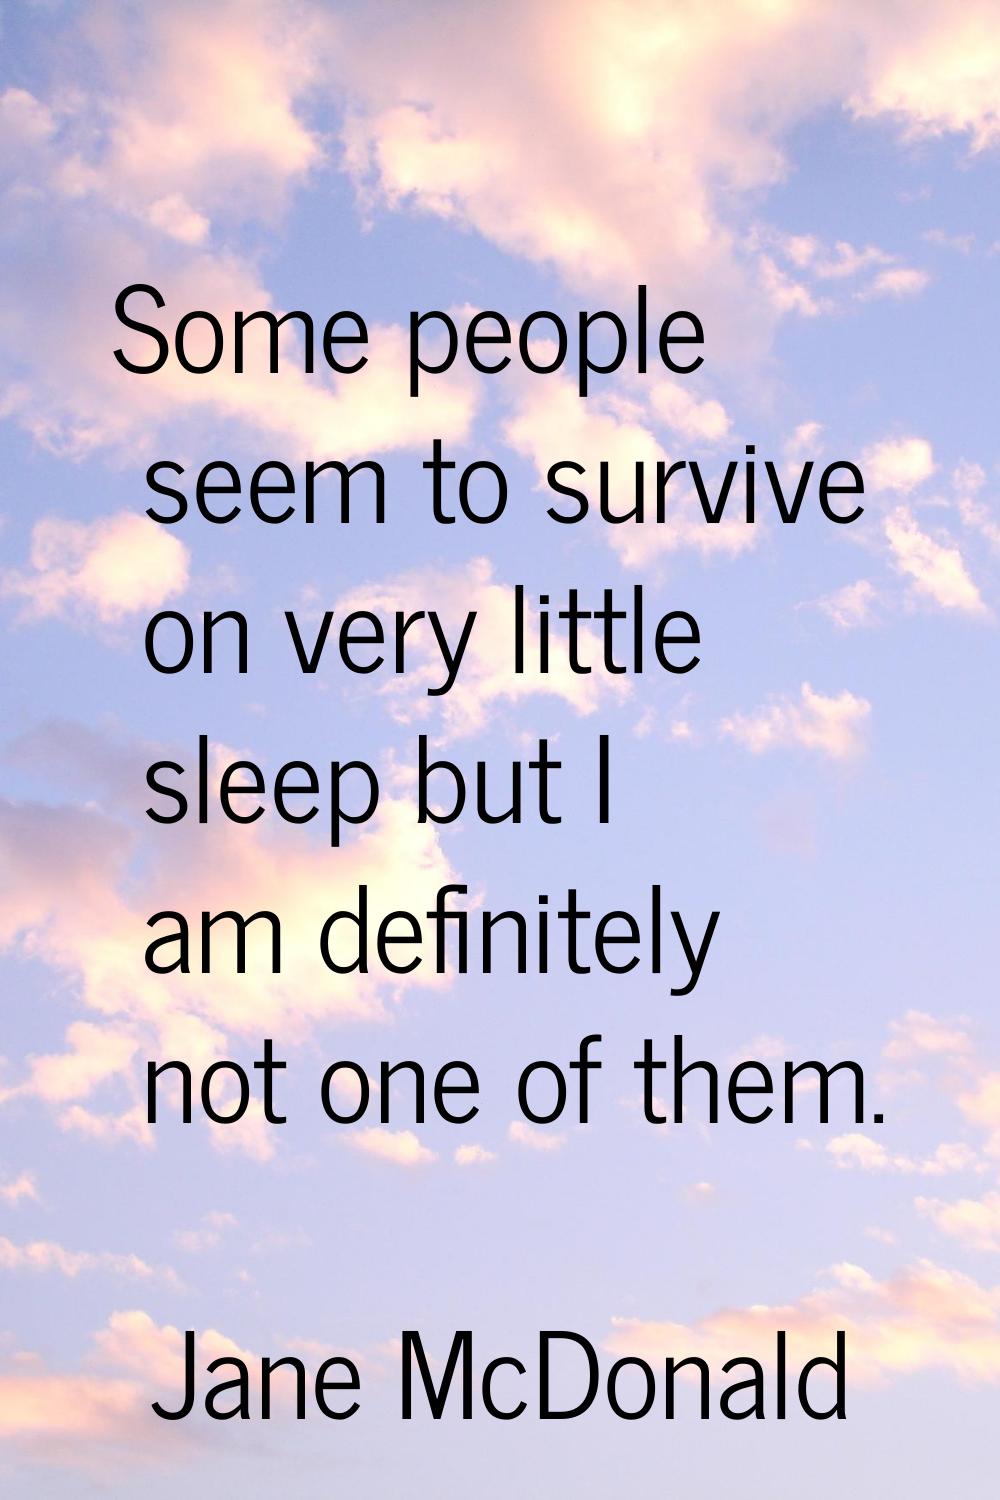 Some people seem to survive on very little sleep but I am definitely not one of them.